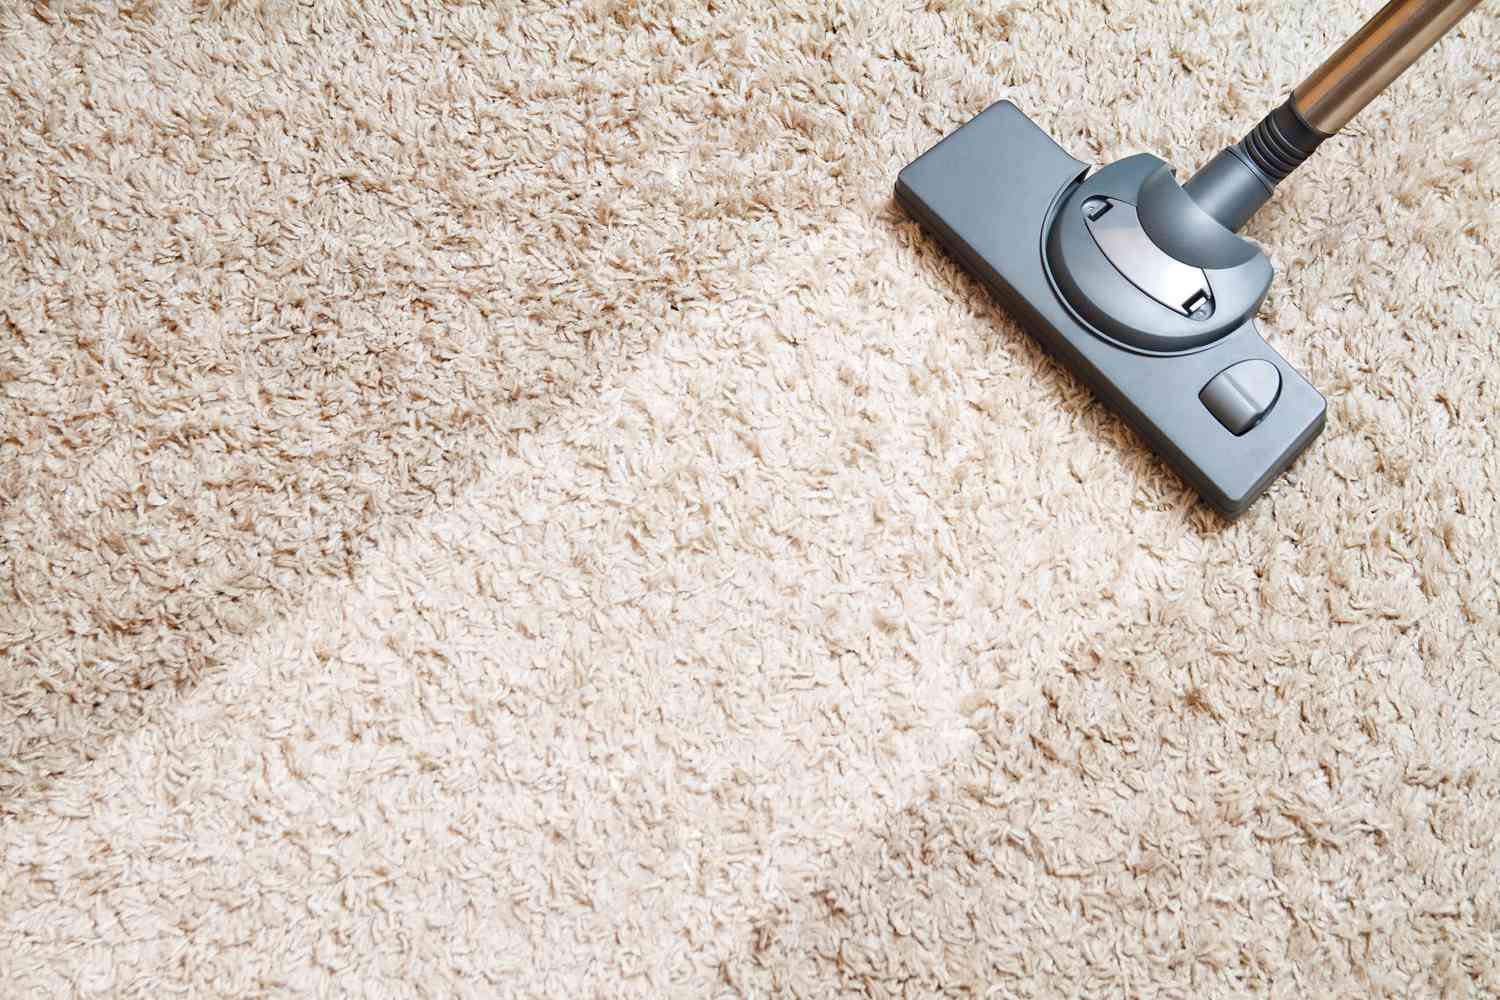 carpet cleaners in Guildford